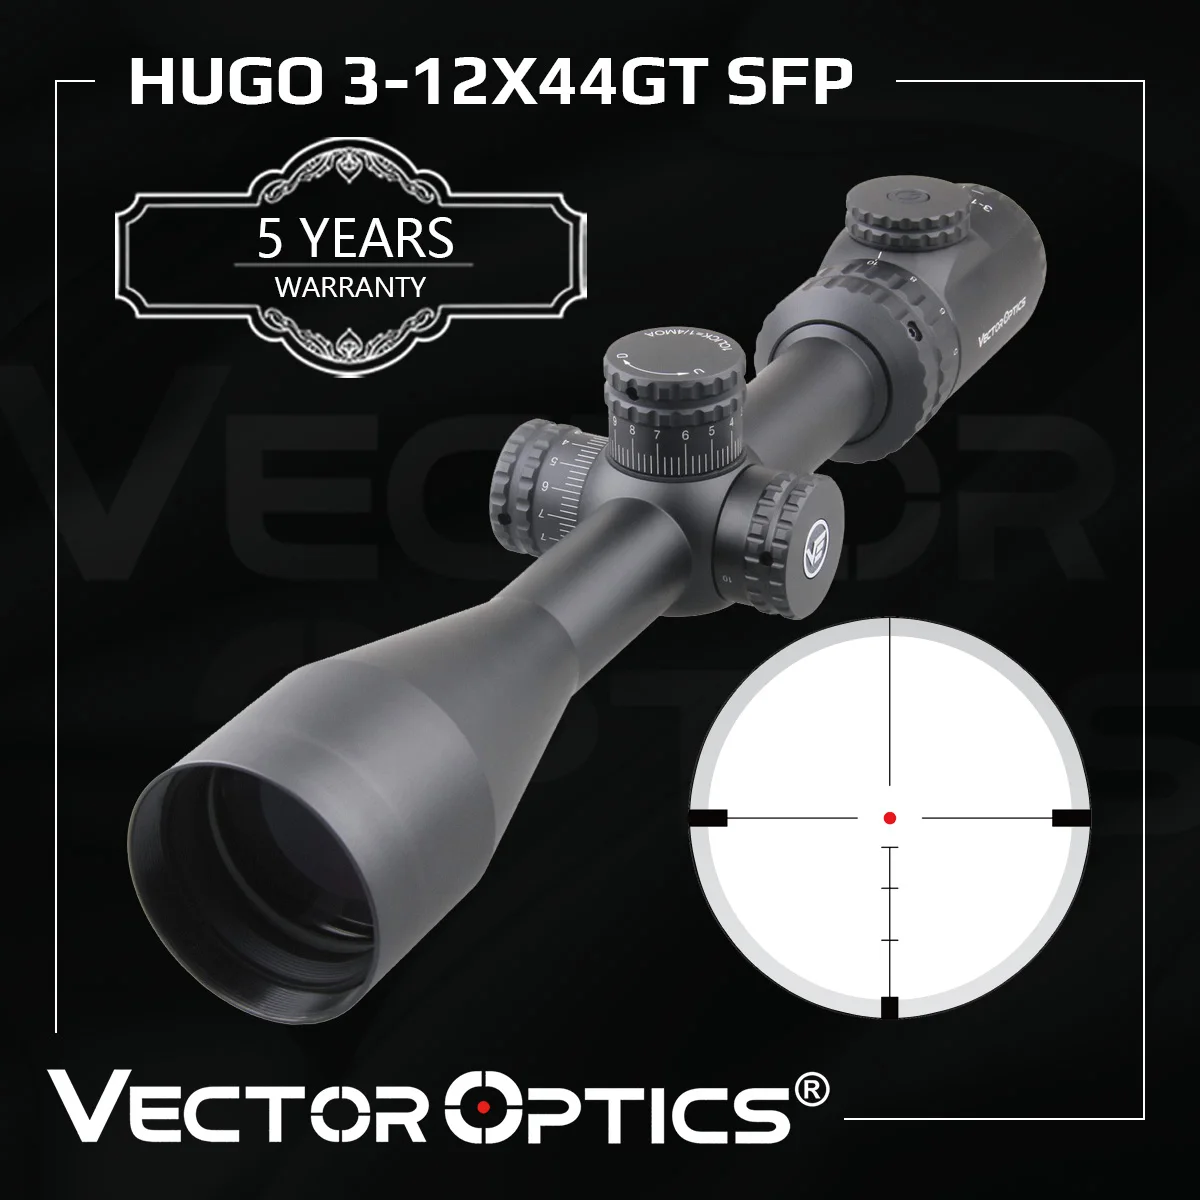 

Vector Optics Hugo 3-12x44 E Field Target Shooting 1 Inch Riflescope Min 10 Yds Etched Glass Reticle Turret Lock Side Focus